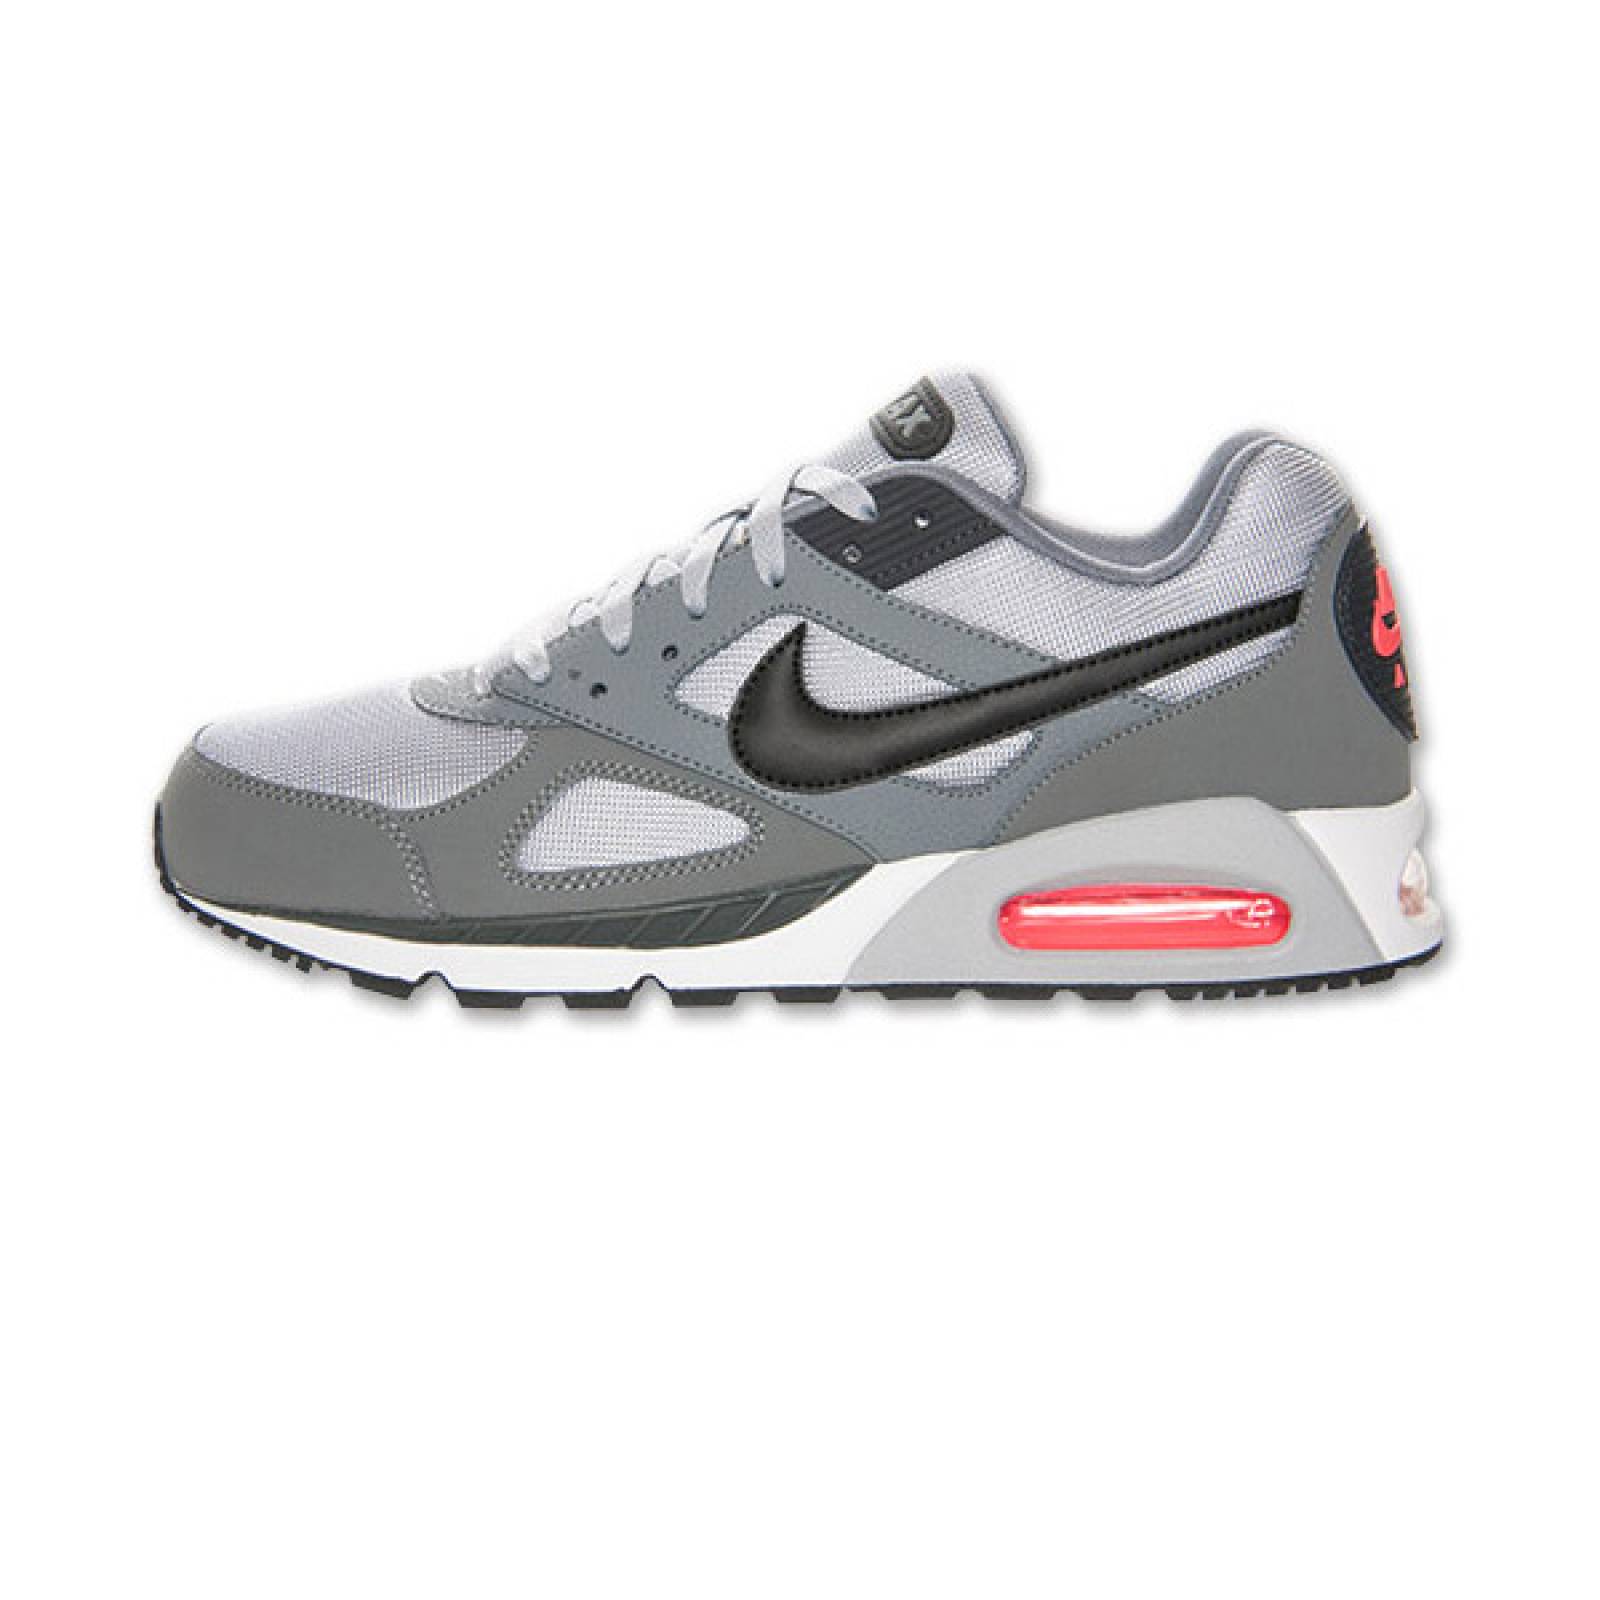 TENIS NIKE AIR MAX IVO HOMBRE SPORT RUNNING GYM